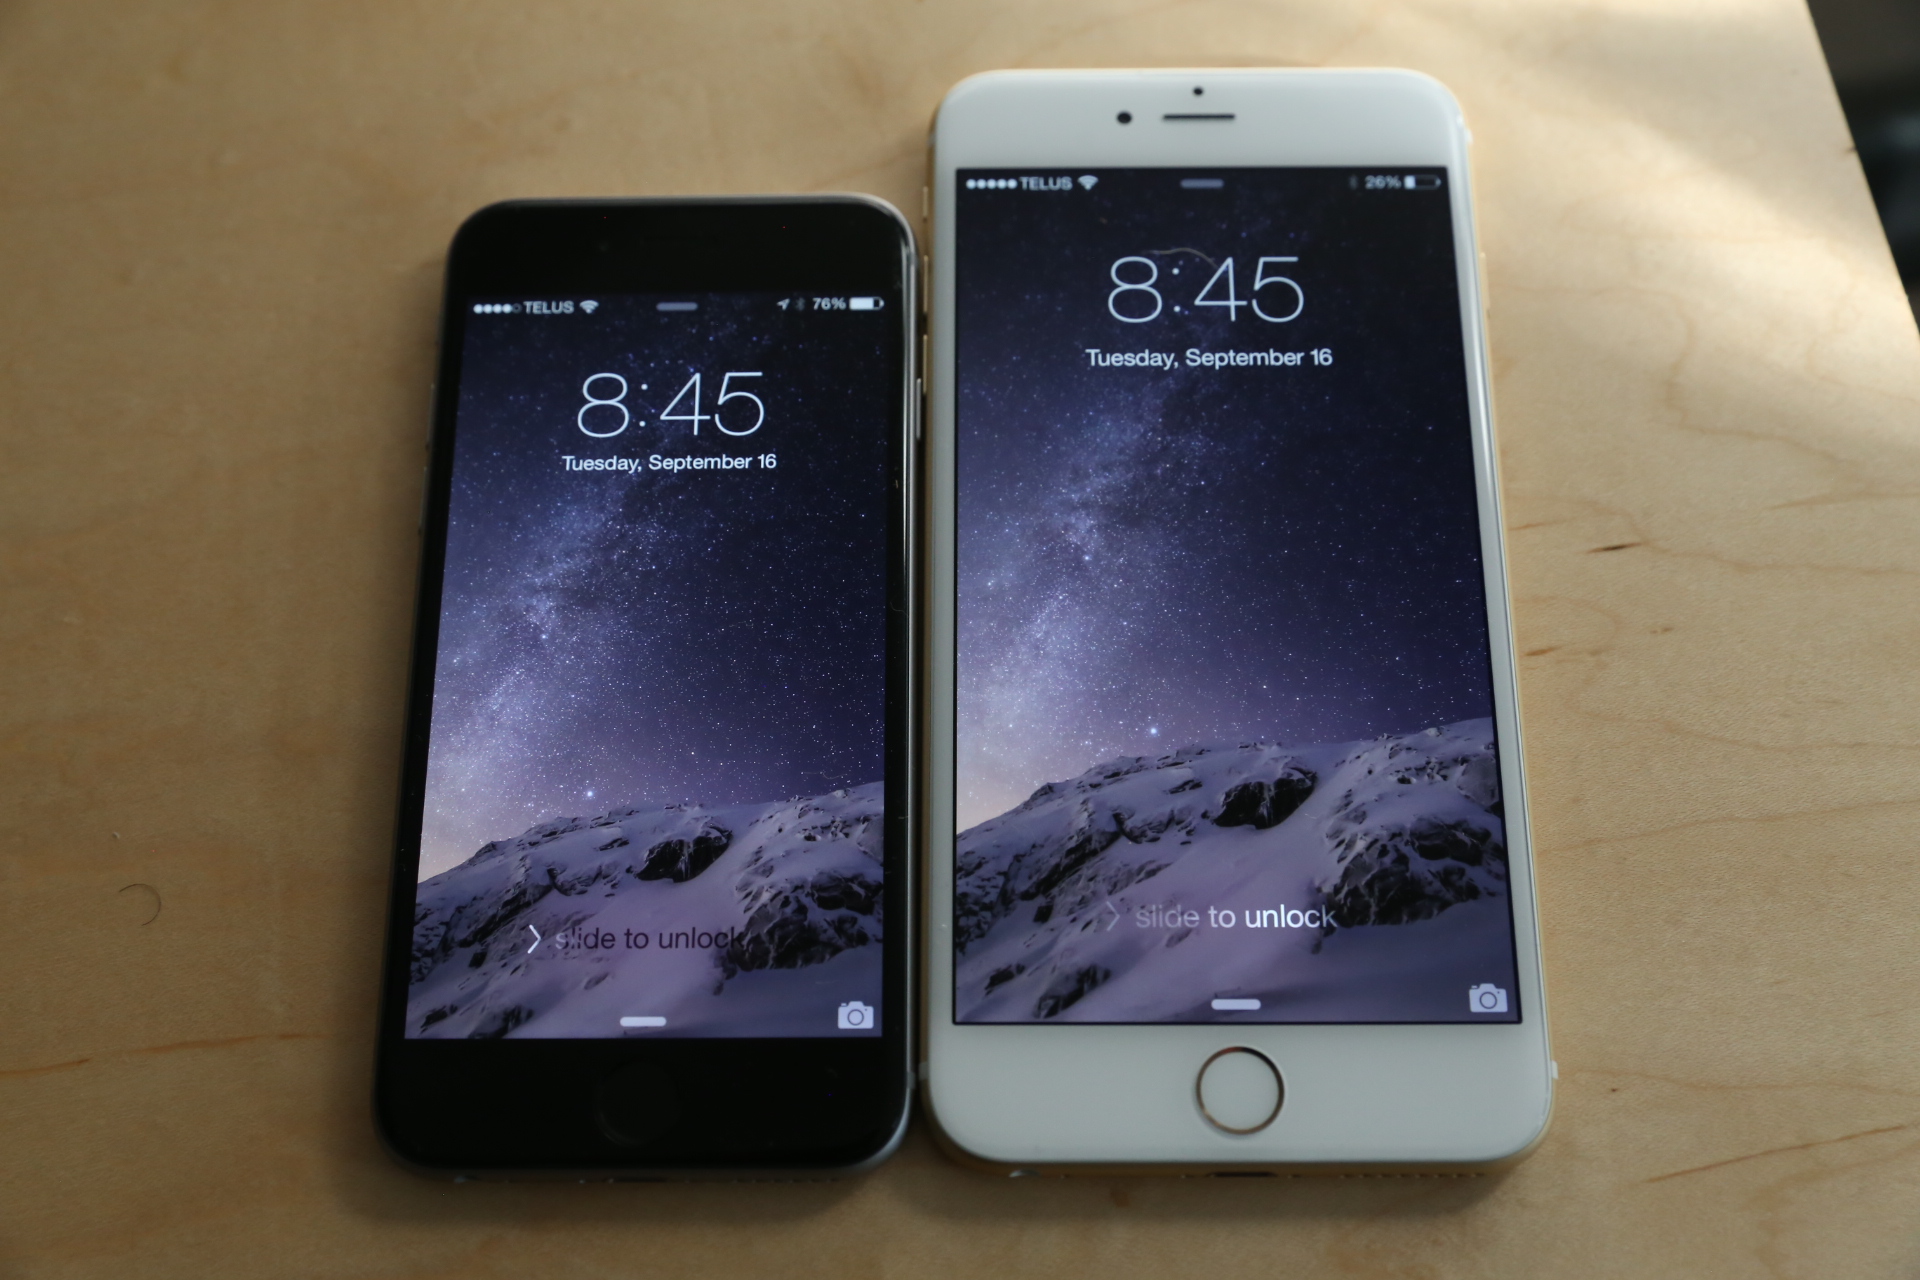 Prefijo genio Medición Most People Prefer The iPhone 6, But The 6 Plus Is Selling OK, Says Analyst  | TechCrunch